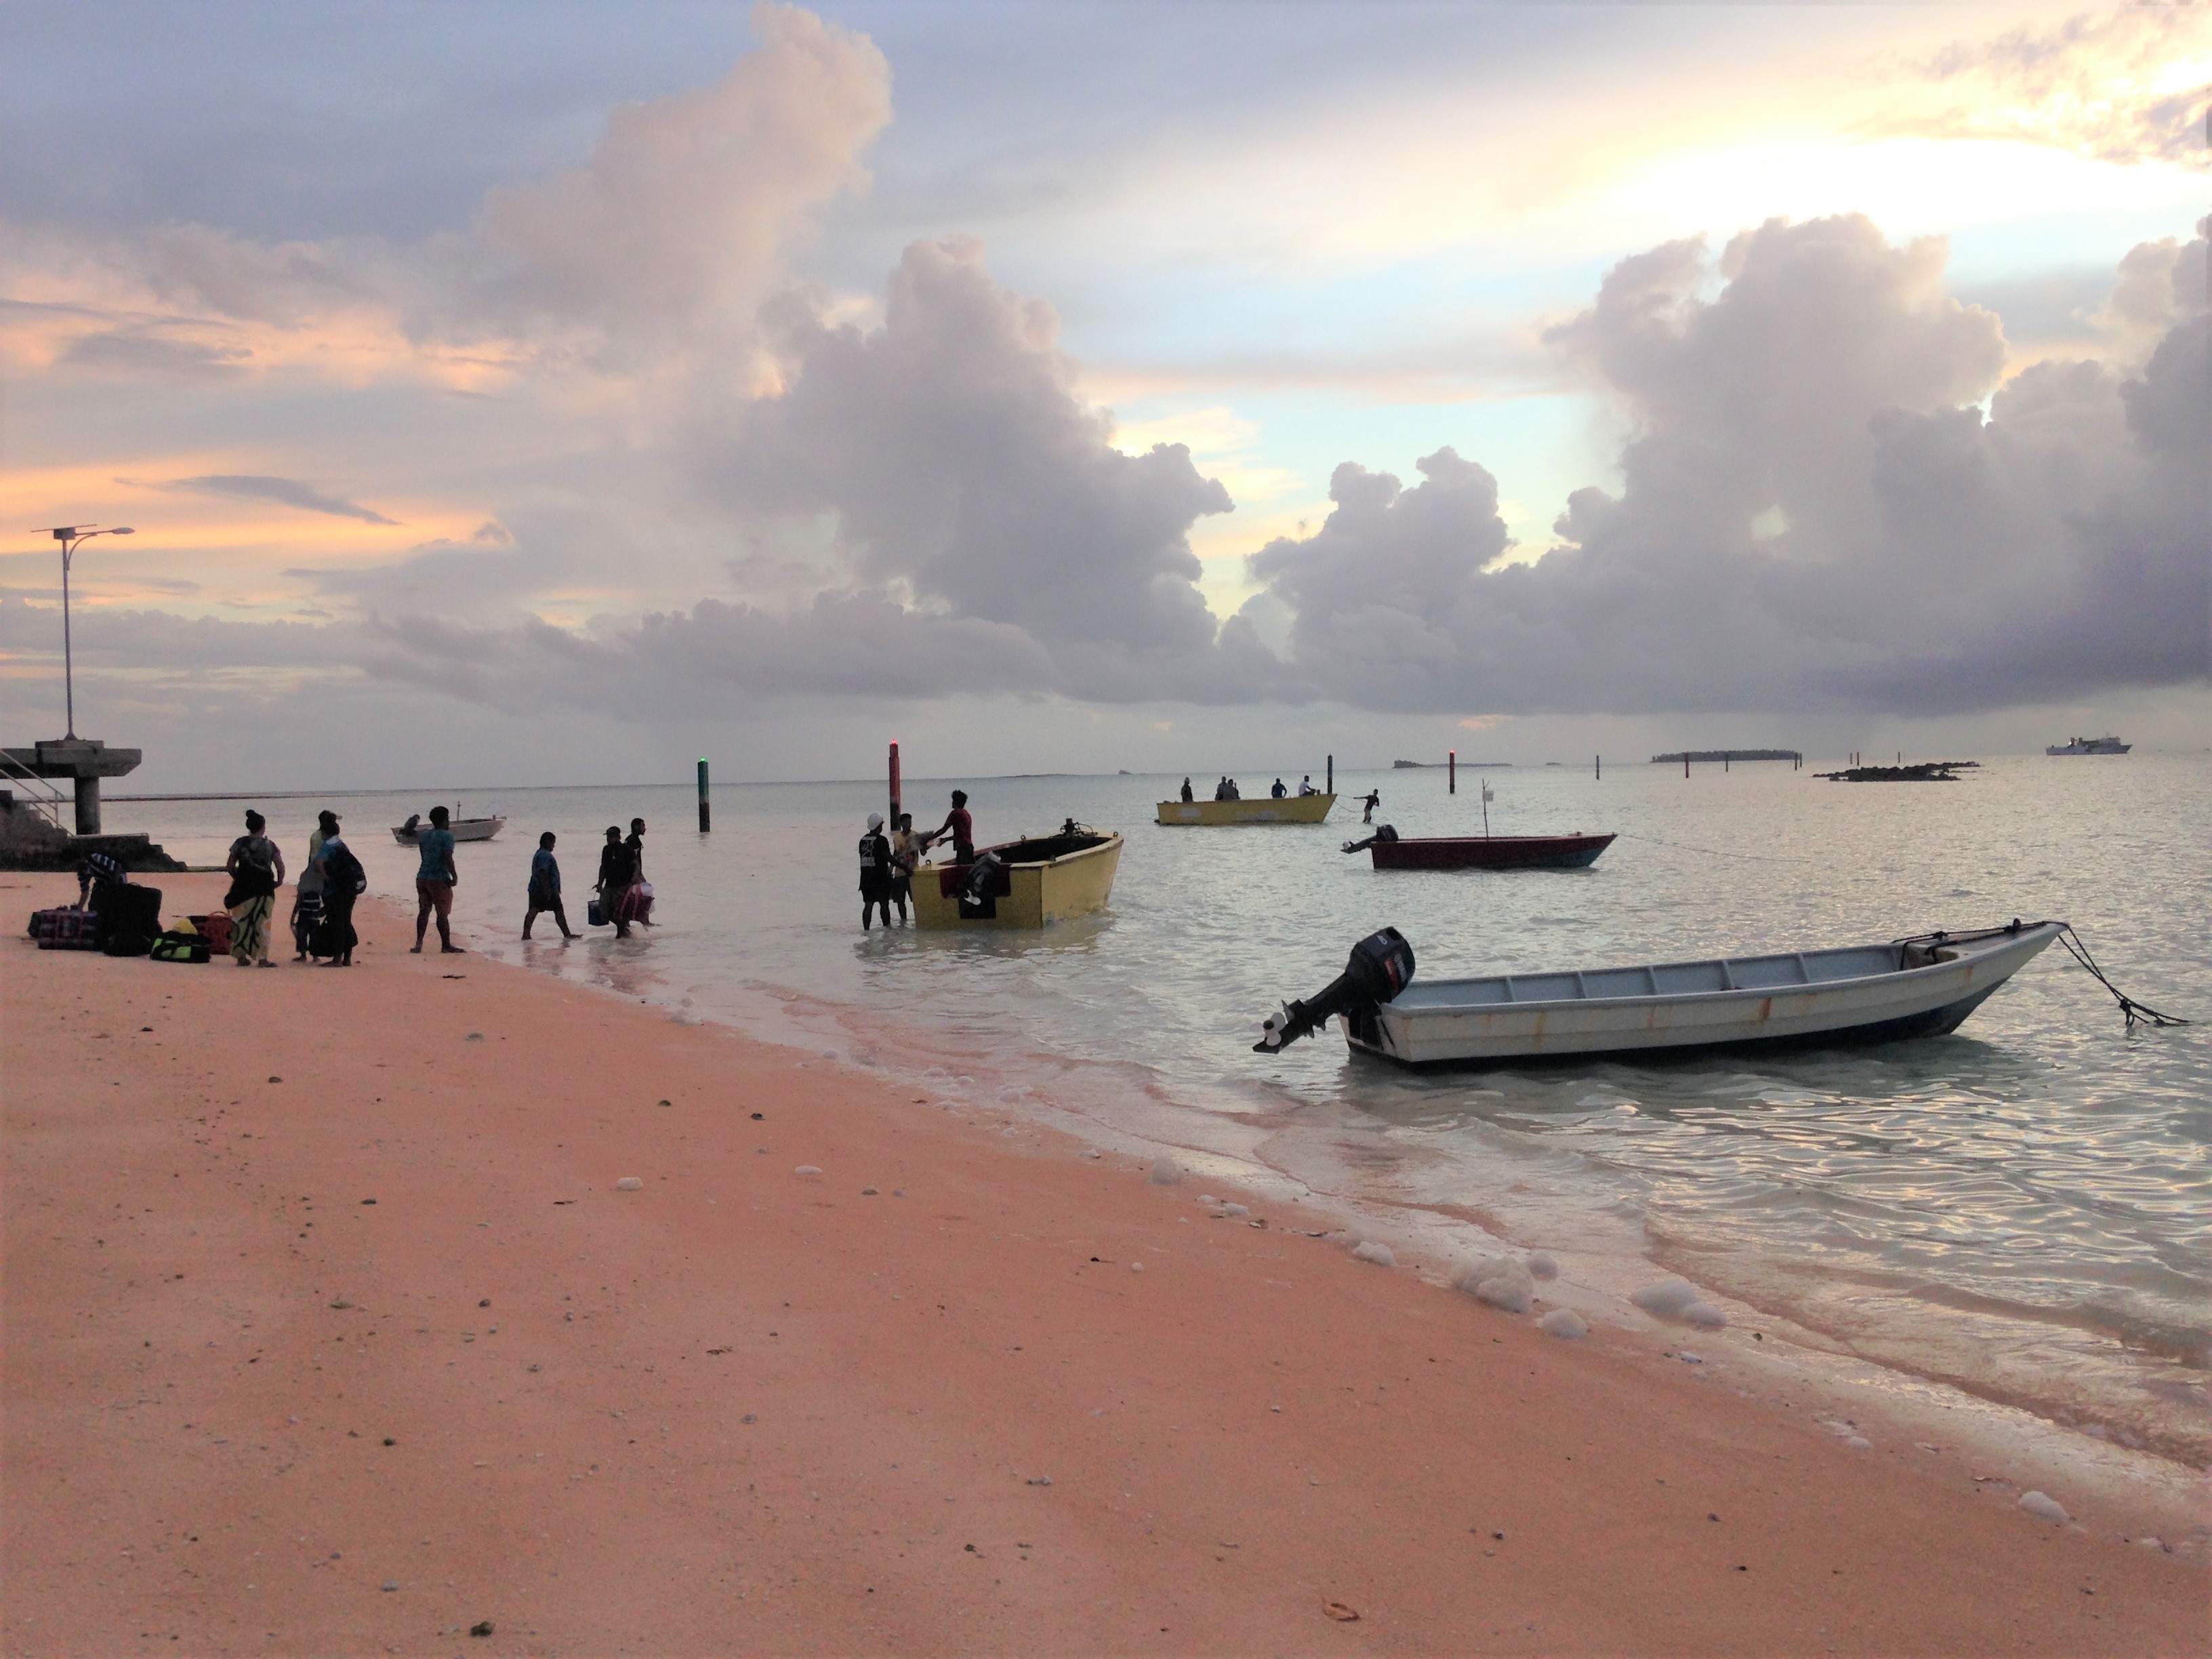 Coastline of Tuvalu showing residents with boats on the shore